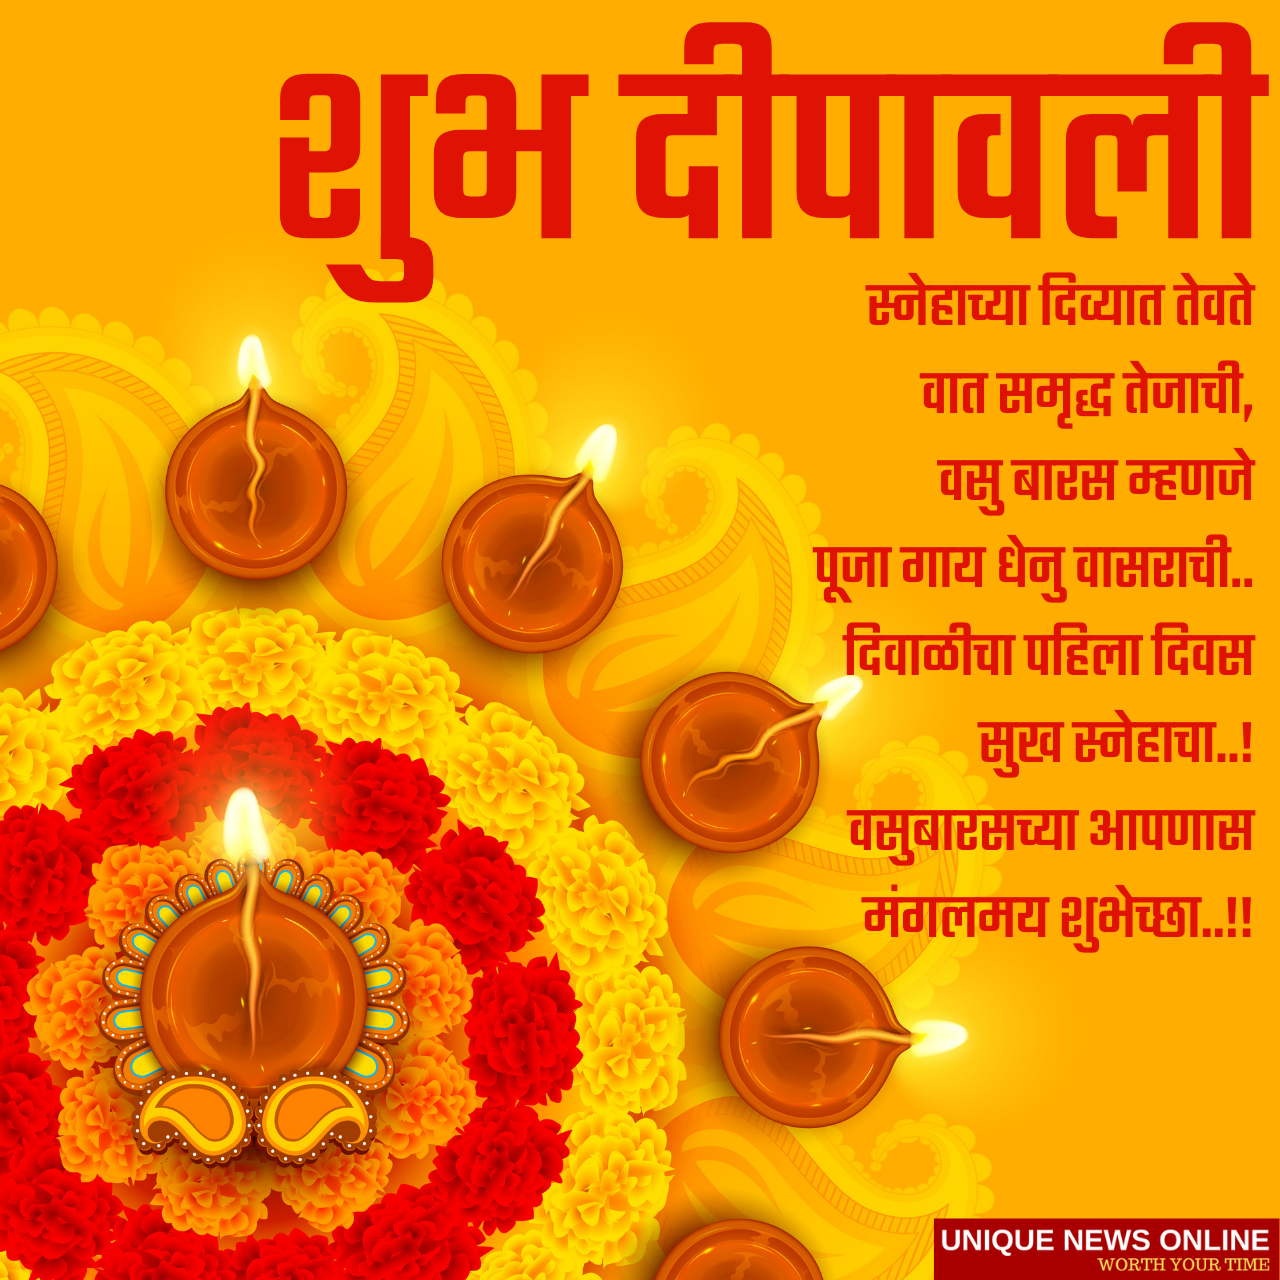 Happy Diwali 2021 Marathi Wishes, HD Images, Messages, Status, Greetings, Stickers and Quotes to Greet your Loved Ones through WhatsApp